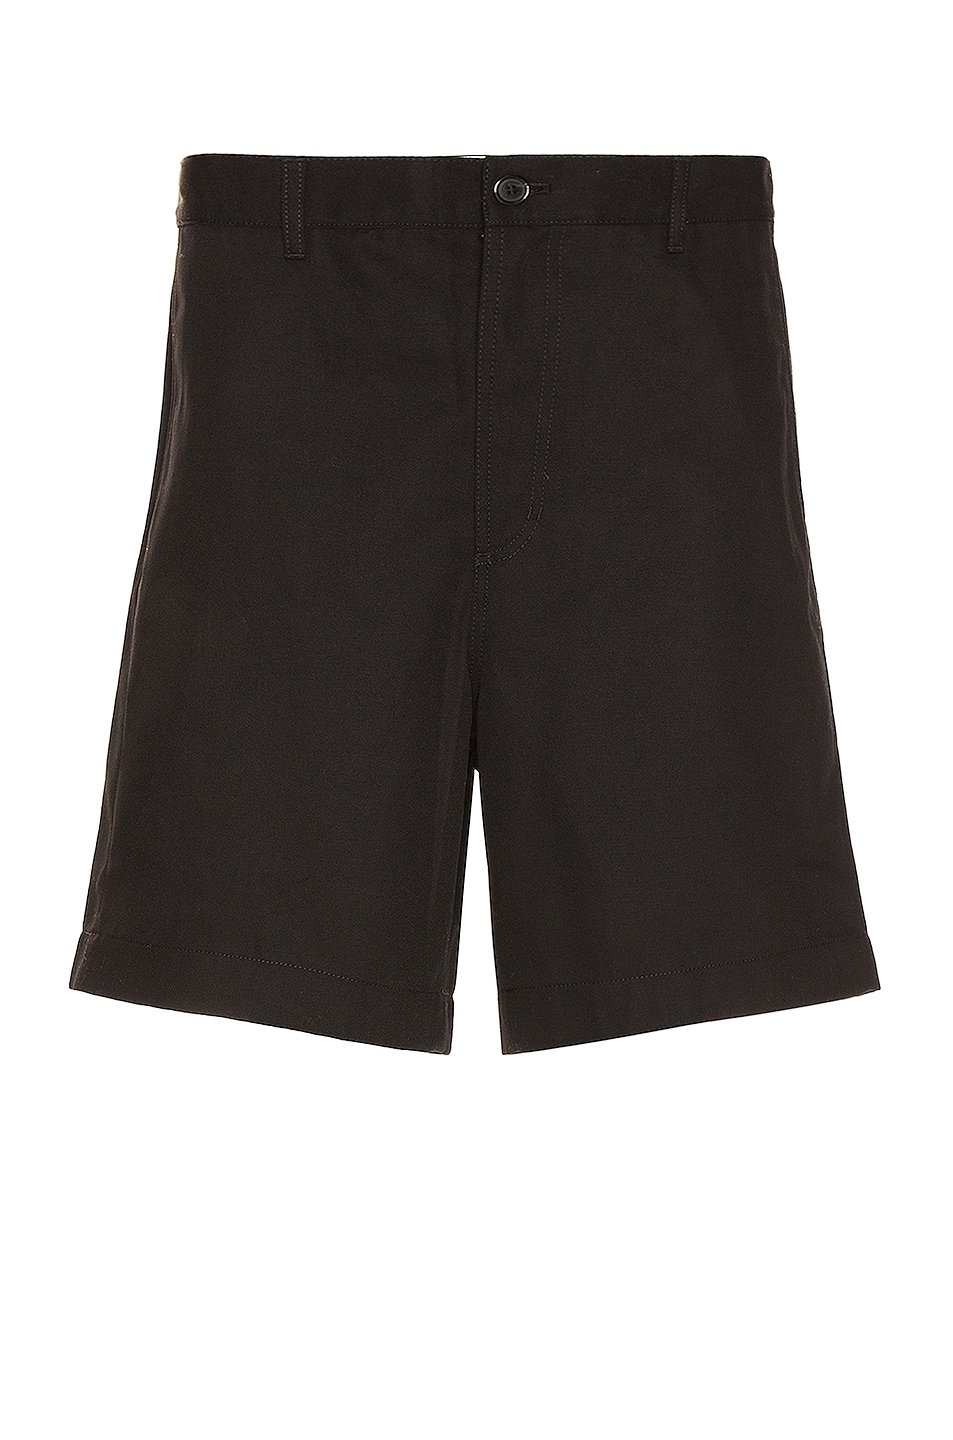 Image 1 of Acne Studios Ringa Cotton Mix Twill Pink Label Shorts in Black